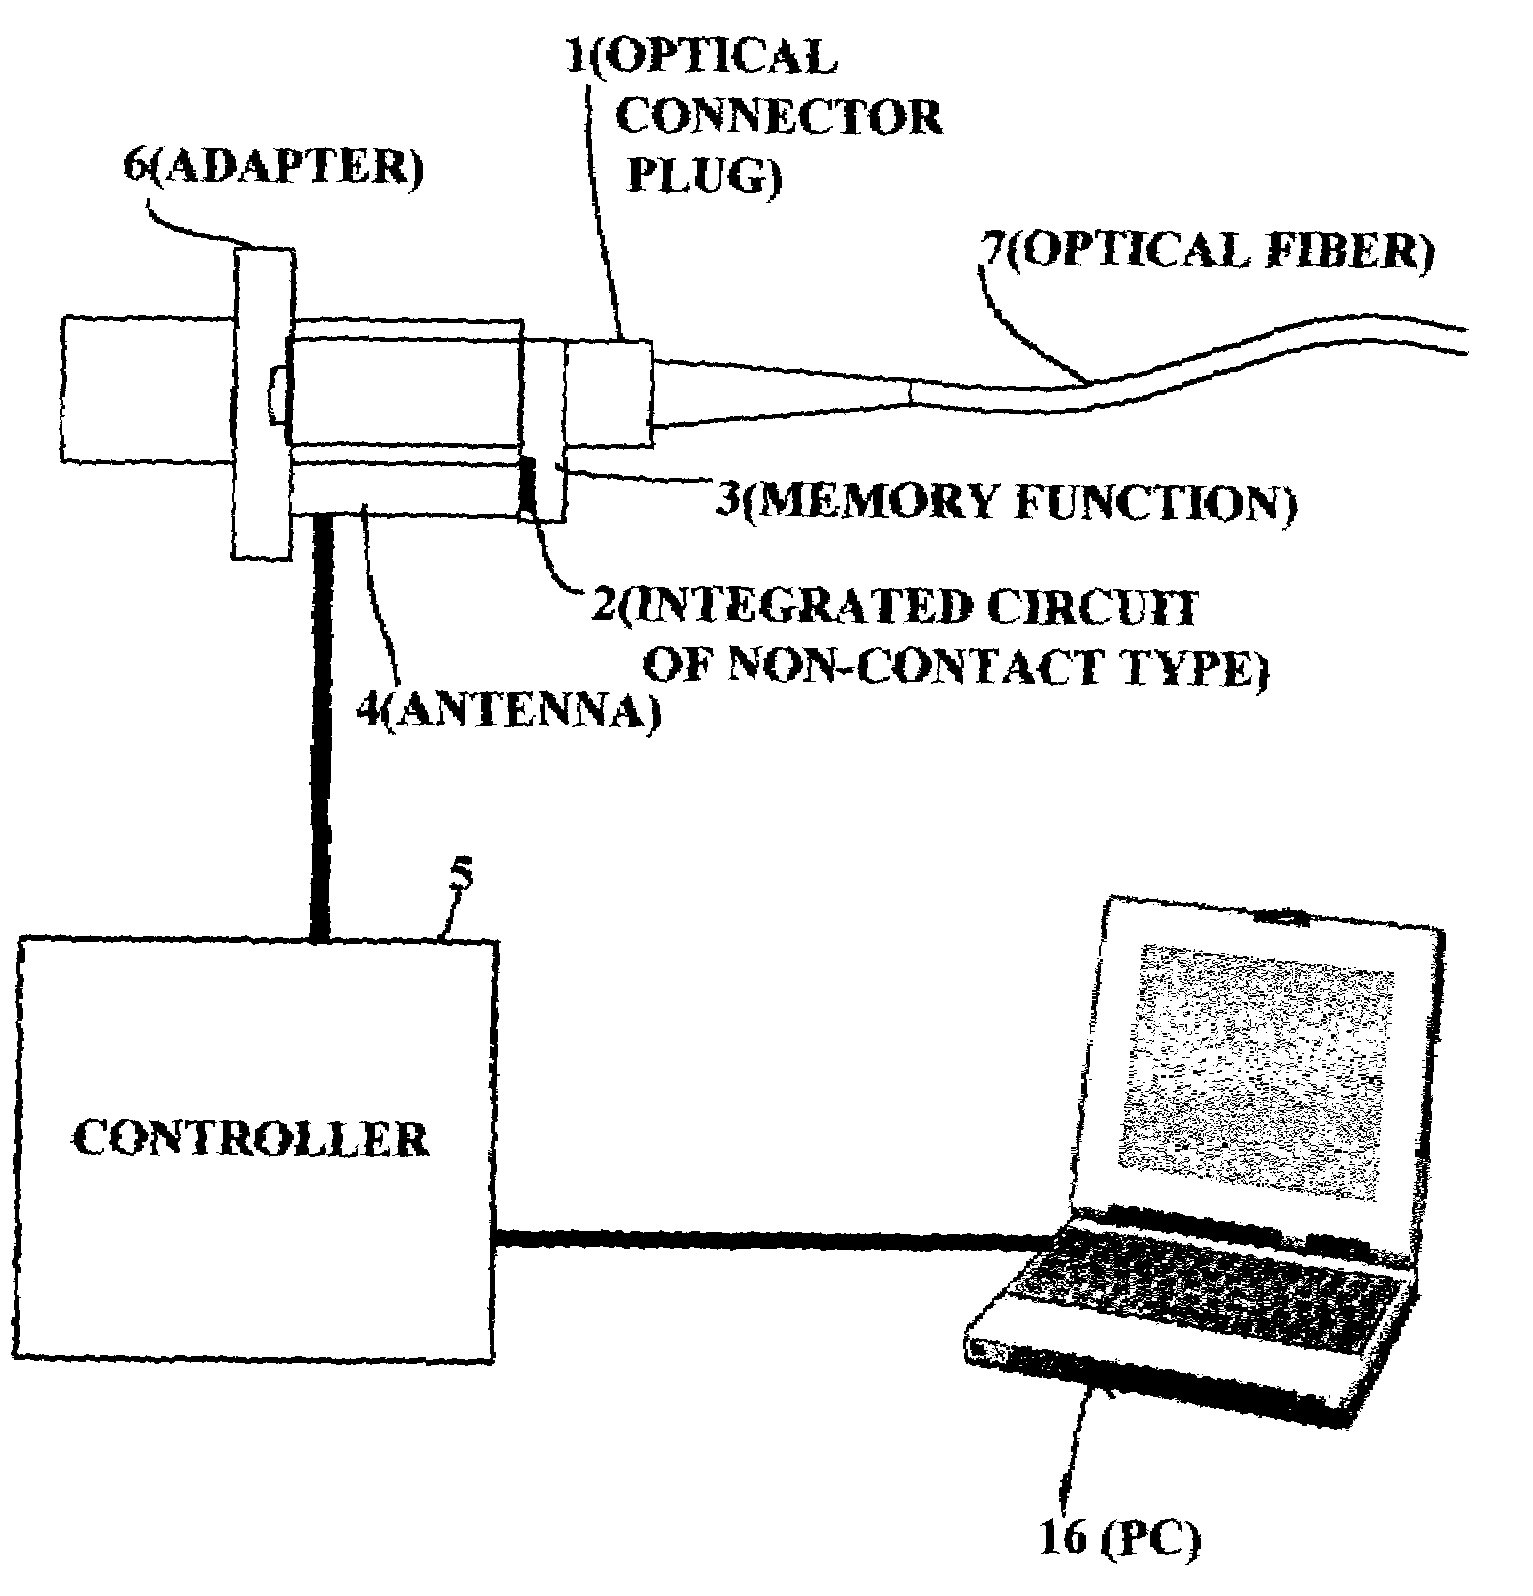 Optical connector with memory function